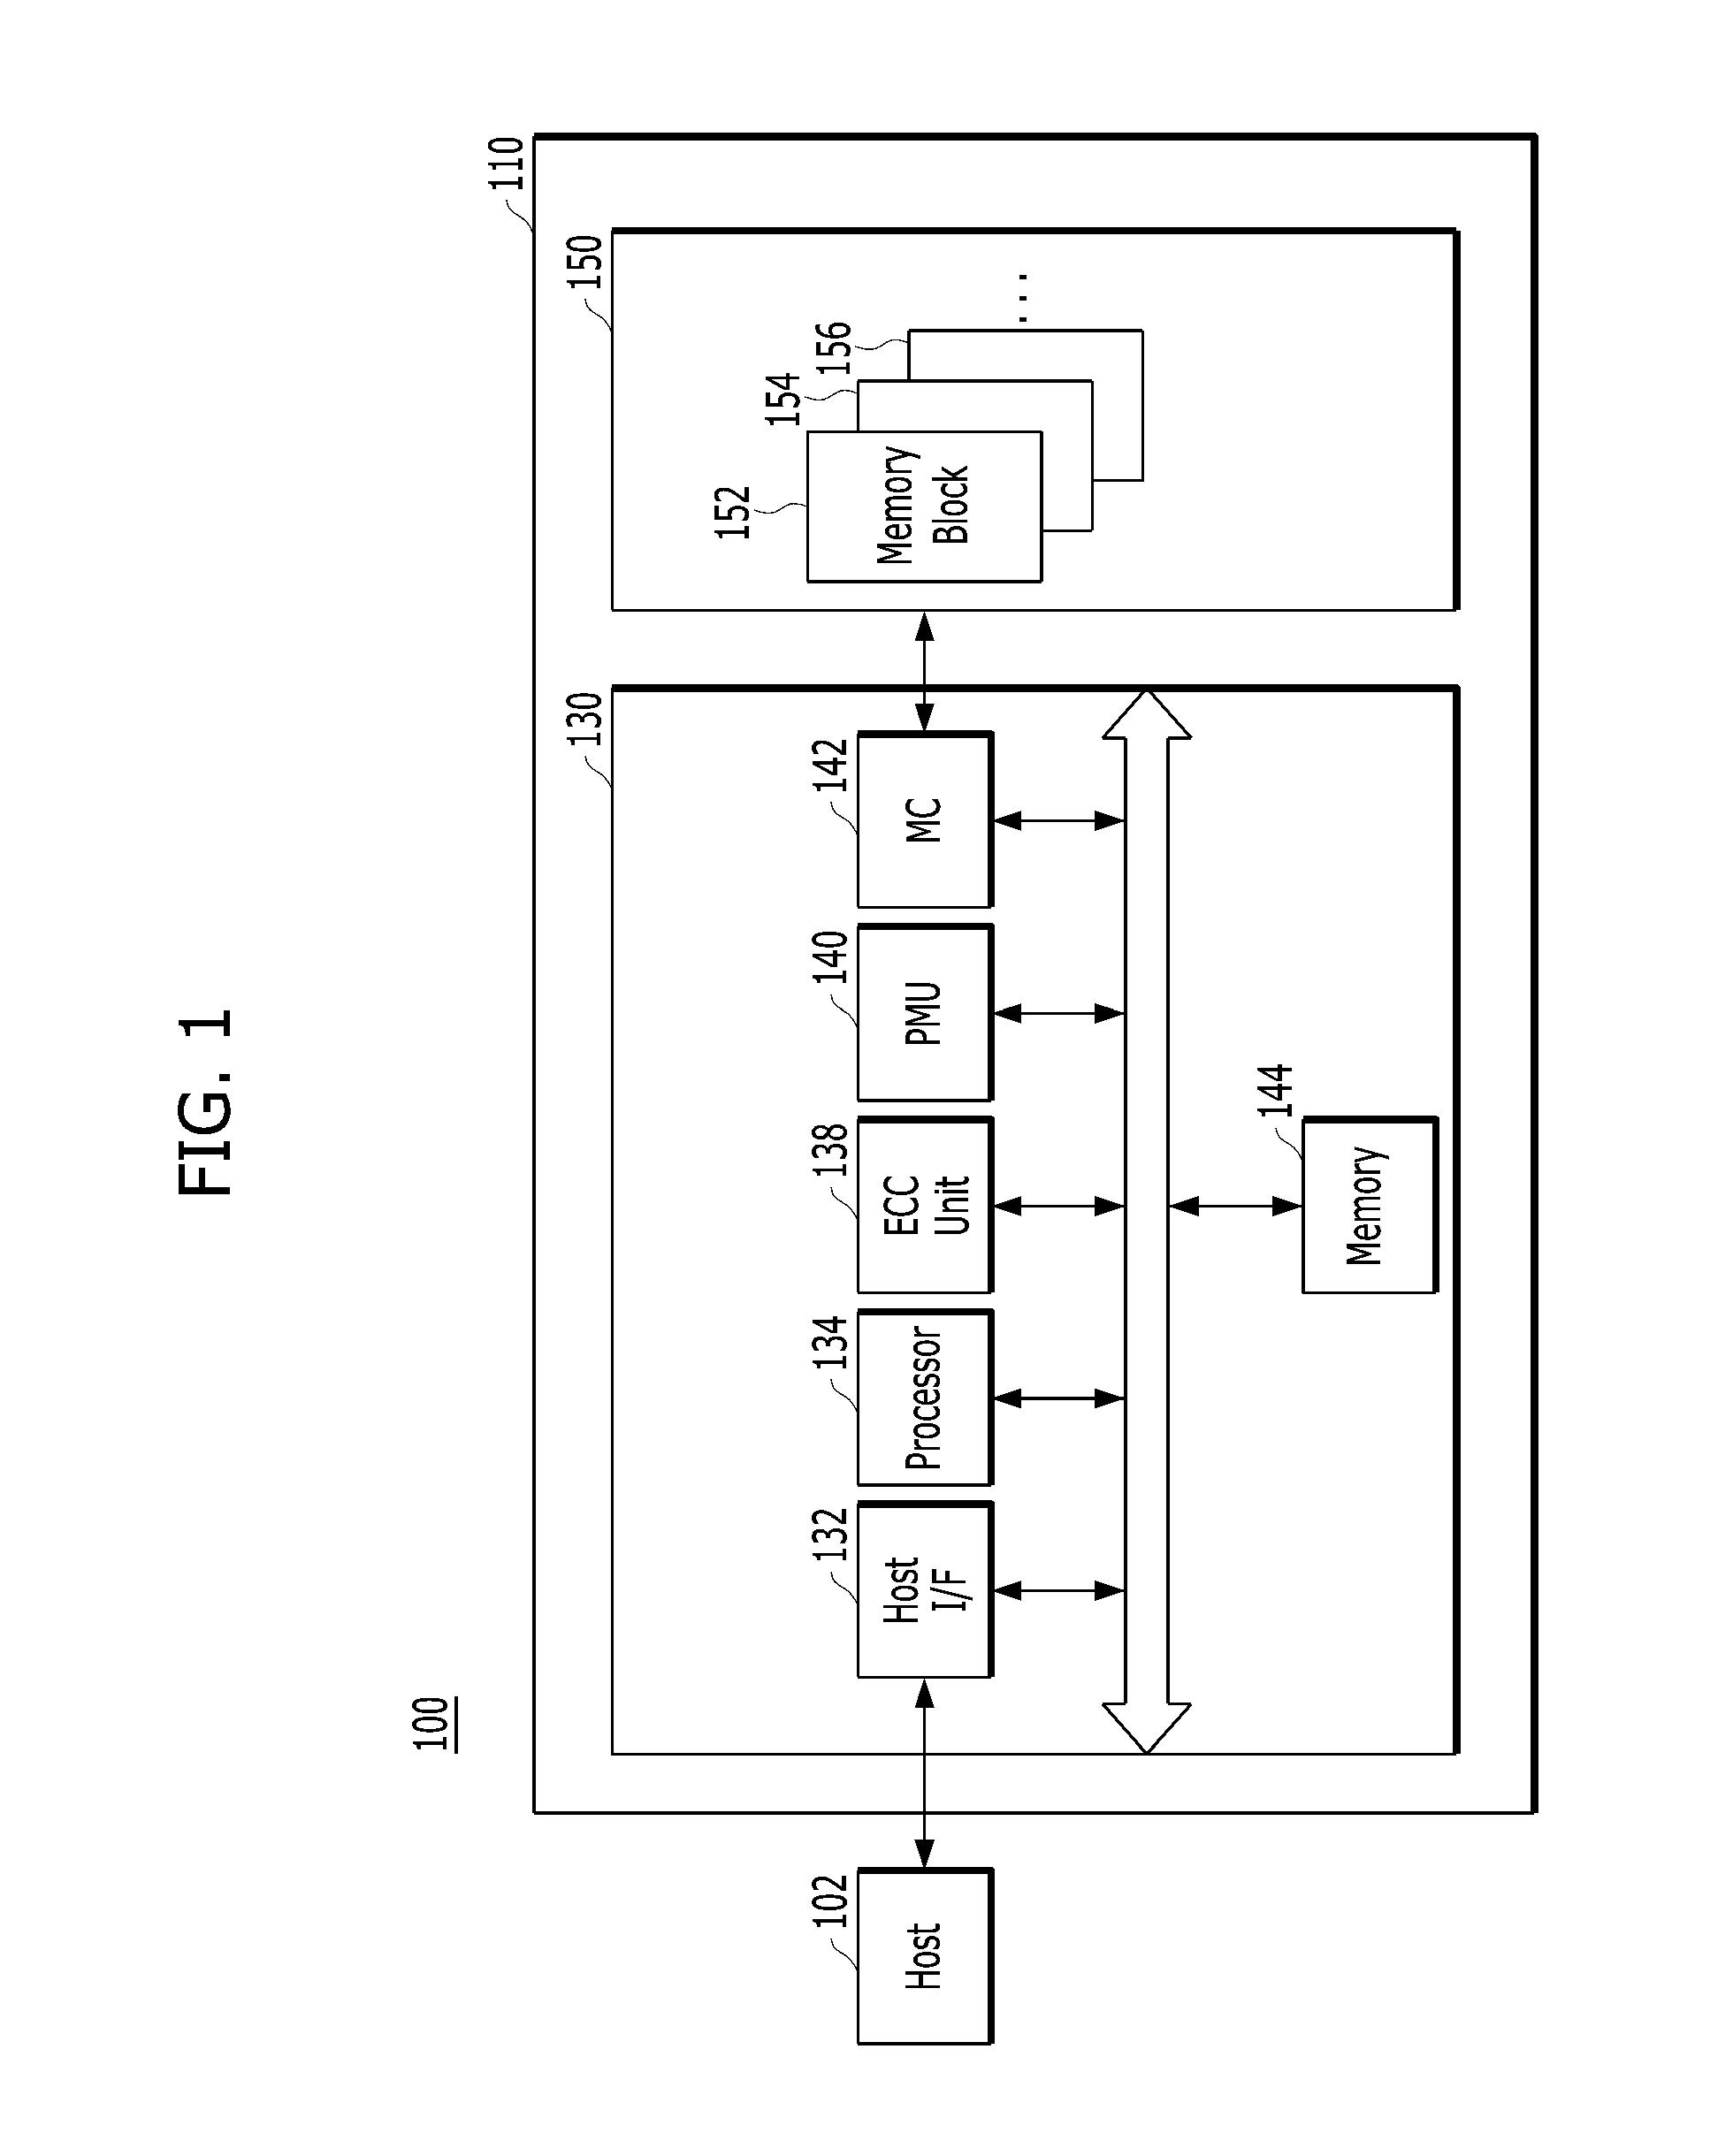 Apparatus and method for turbo product codes